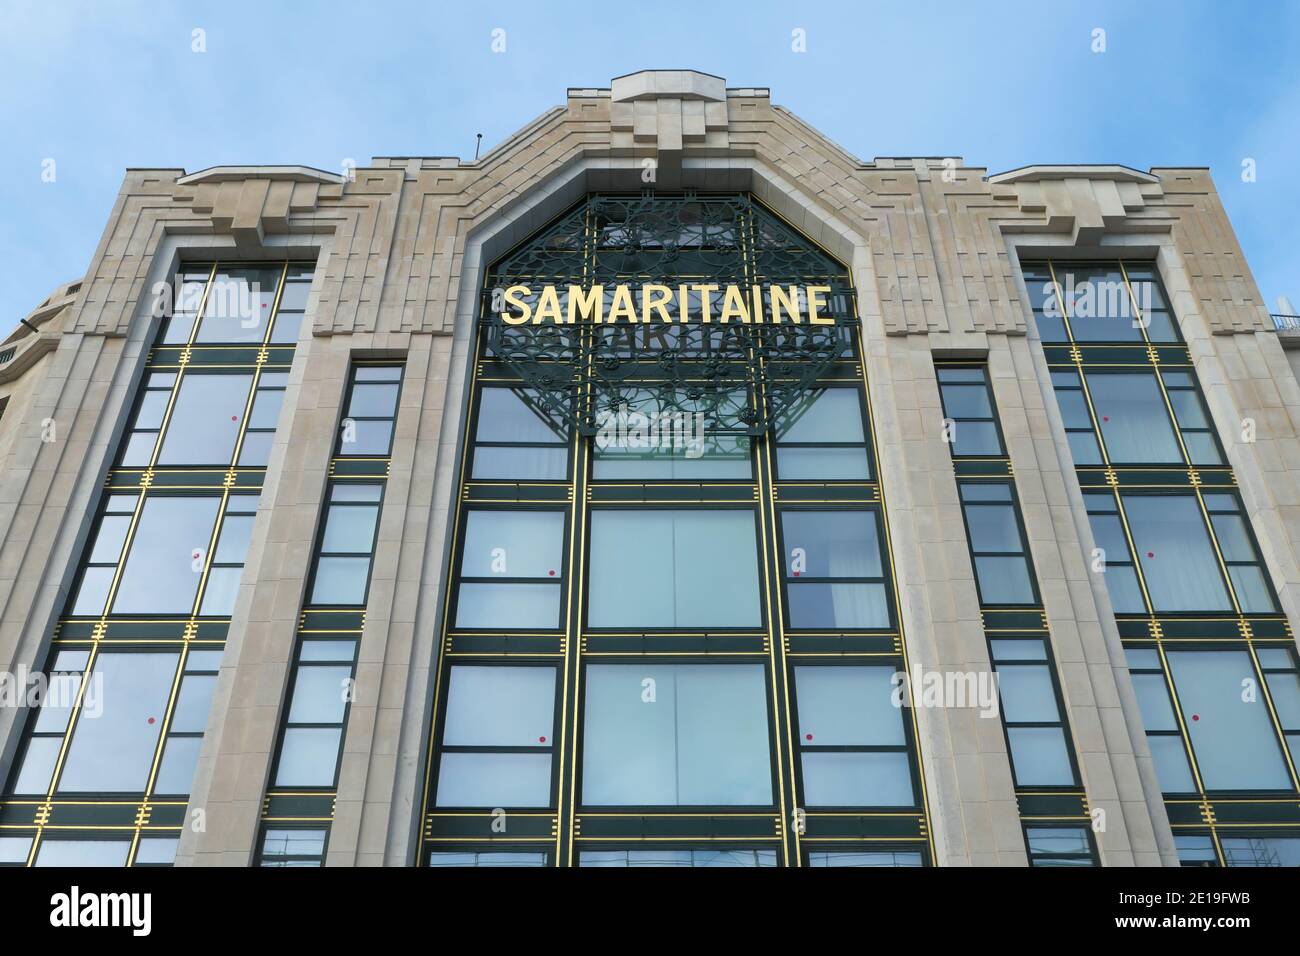 Paris, France. December 30. 2020. View of the famous building of the Samaritaine department store. Stock Photo